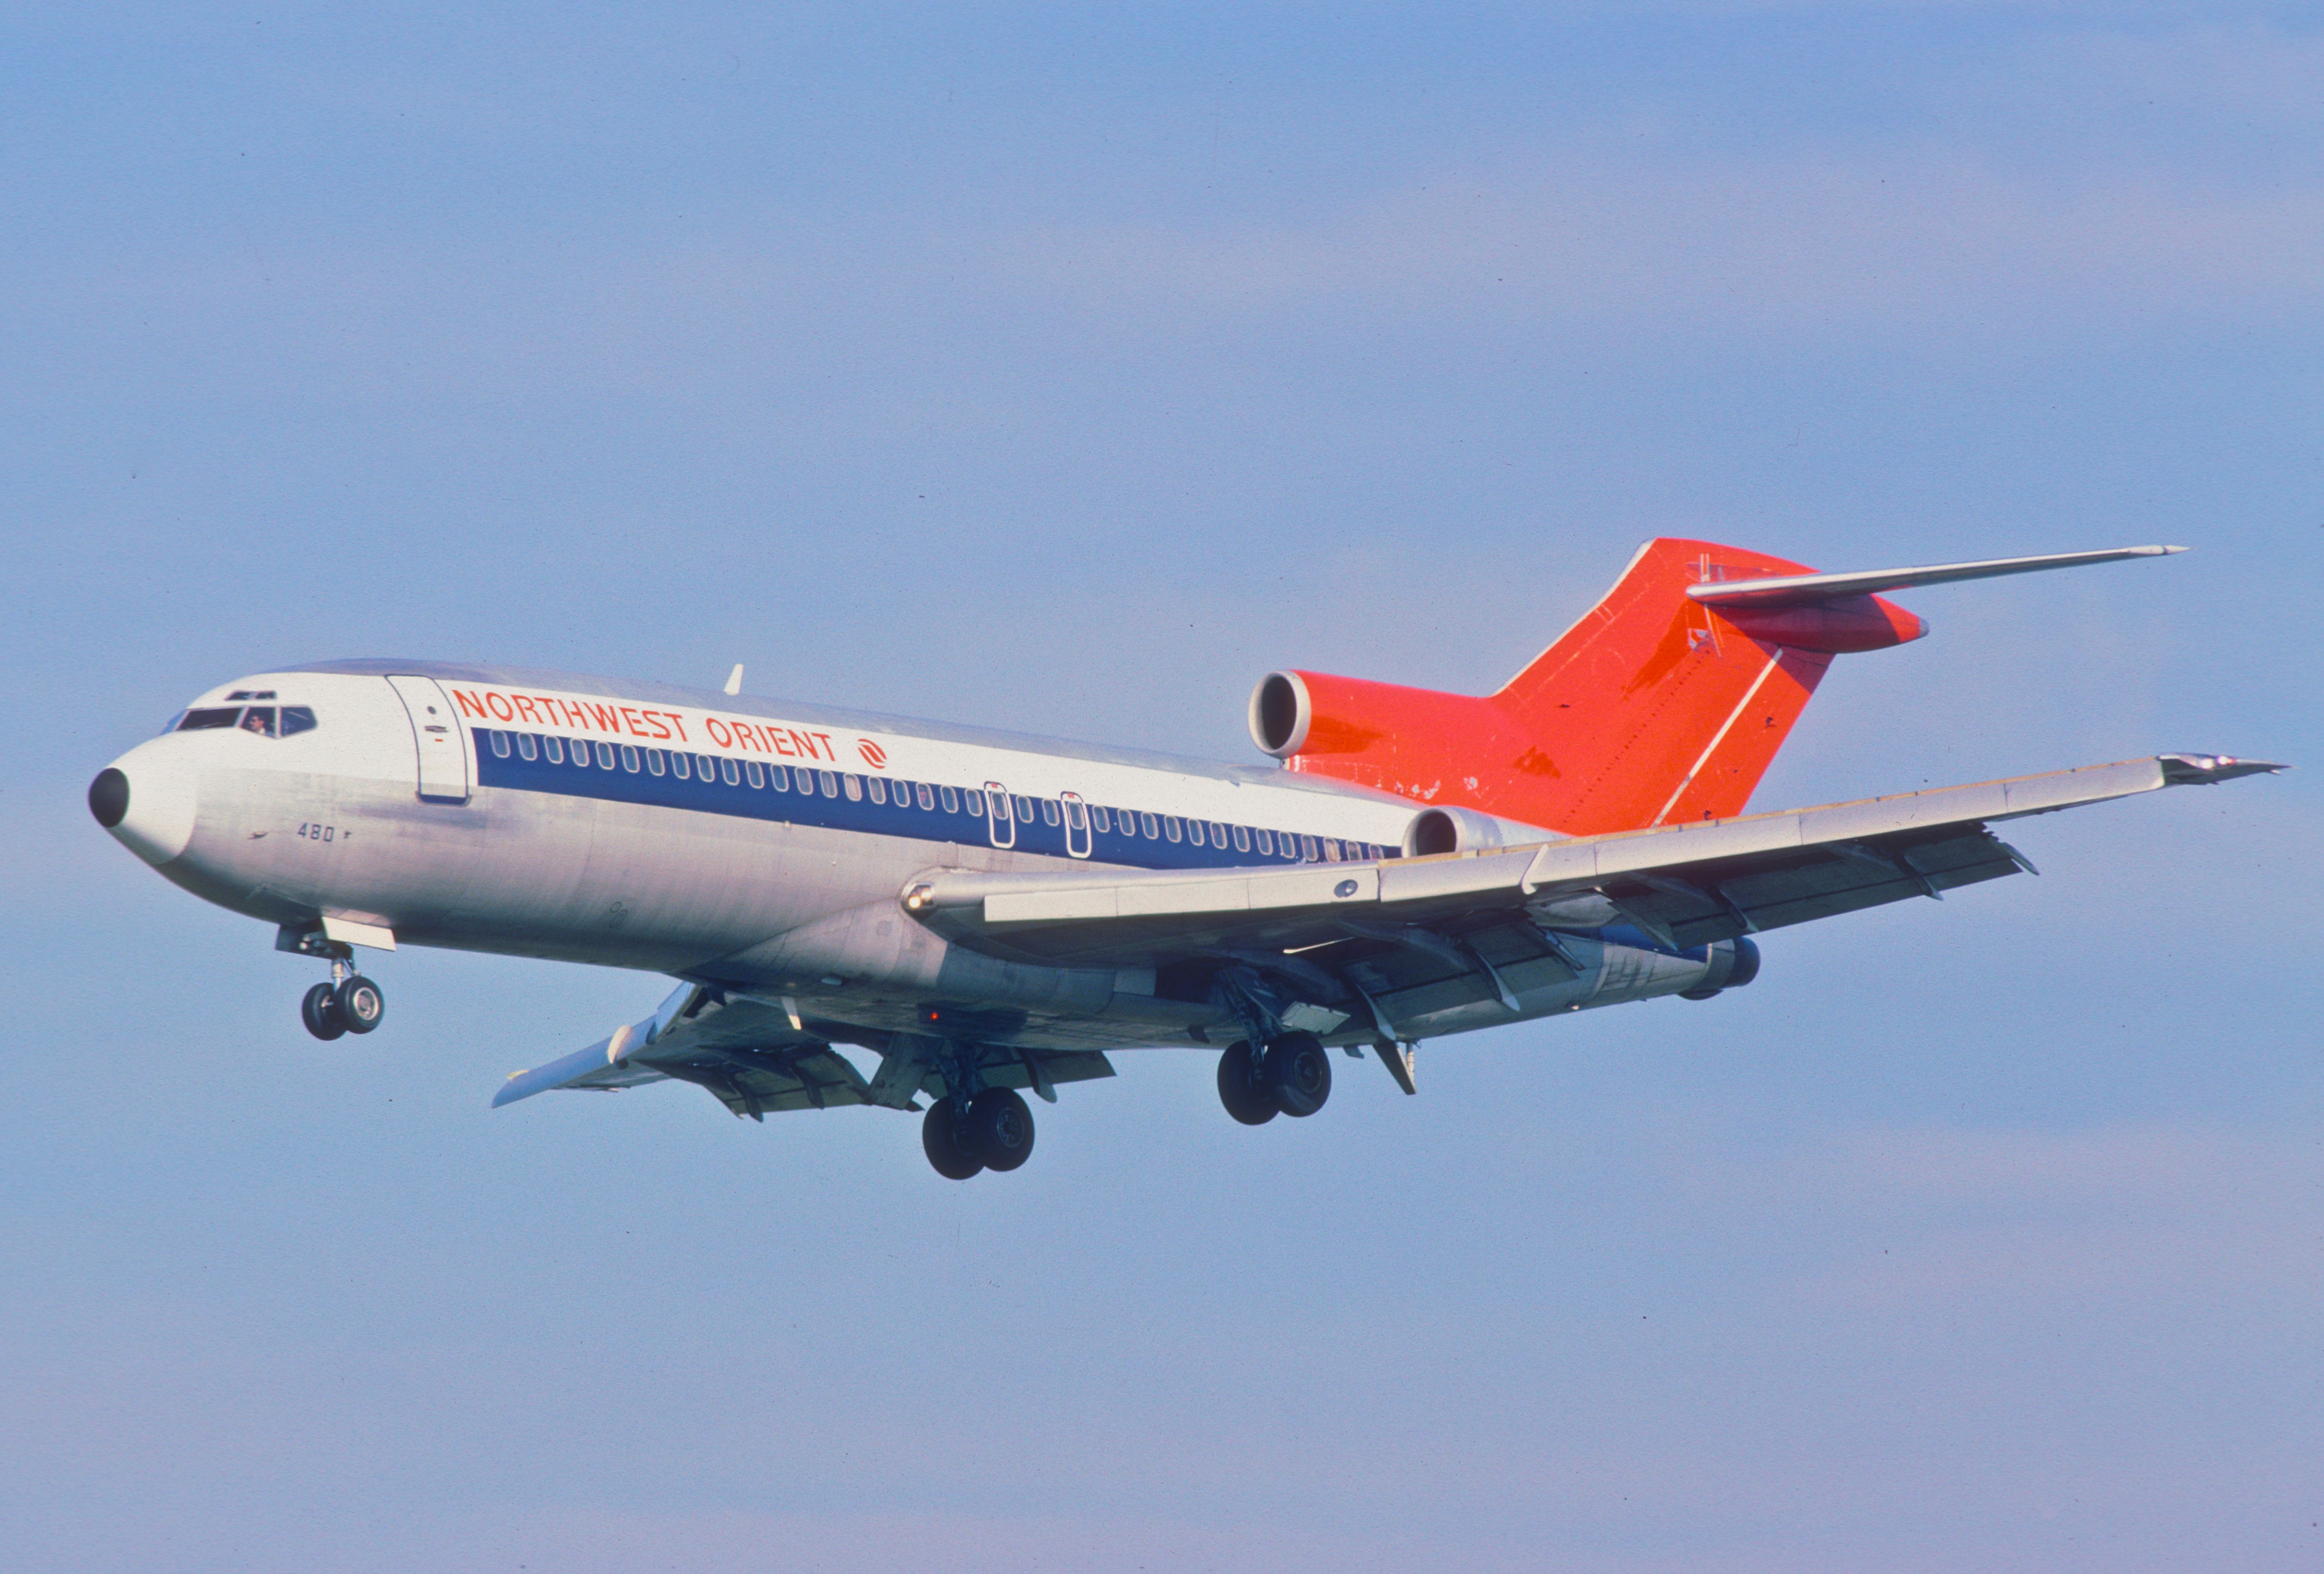 A Northwest Orient Airlines Boeing 727 flying in the sky.